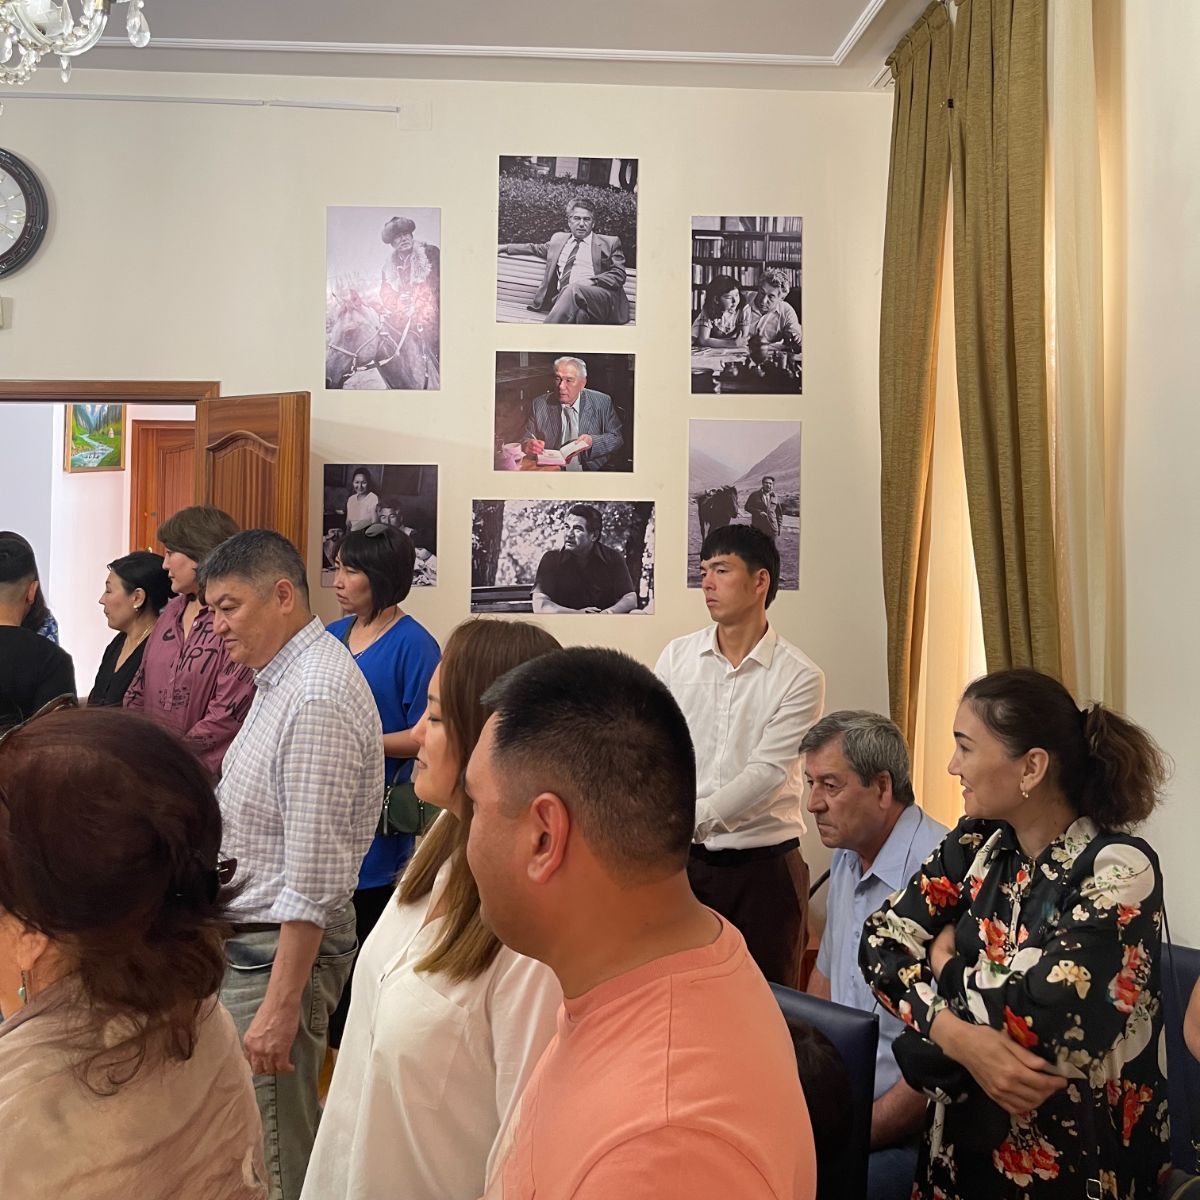 The event was held at the Embassy of the Kyrgyz Republic in Turkmenistan on the occasion of the celebration of the 30th anniversary of the adoption of the Constitution of the Kyrgyz Republic and the 95th anniversary of the National writer Ch.Aitmatov